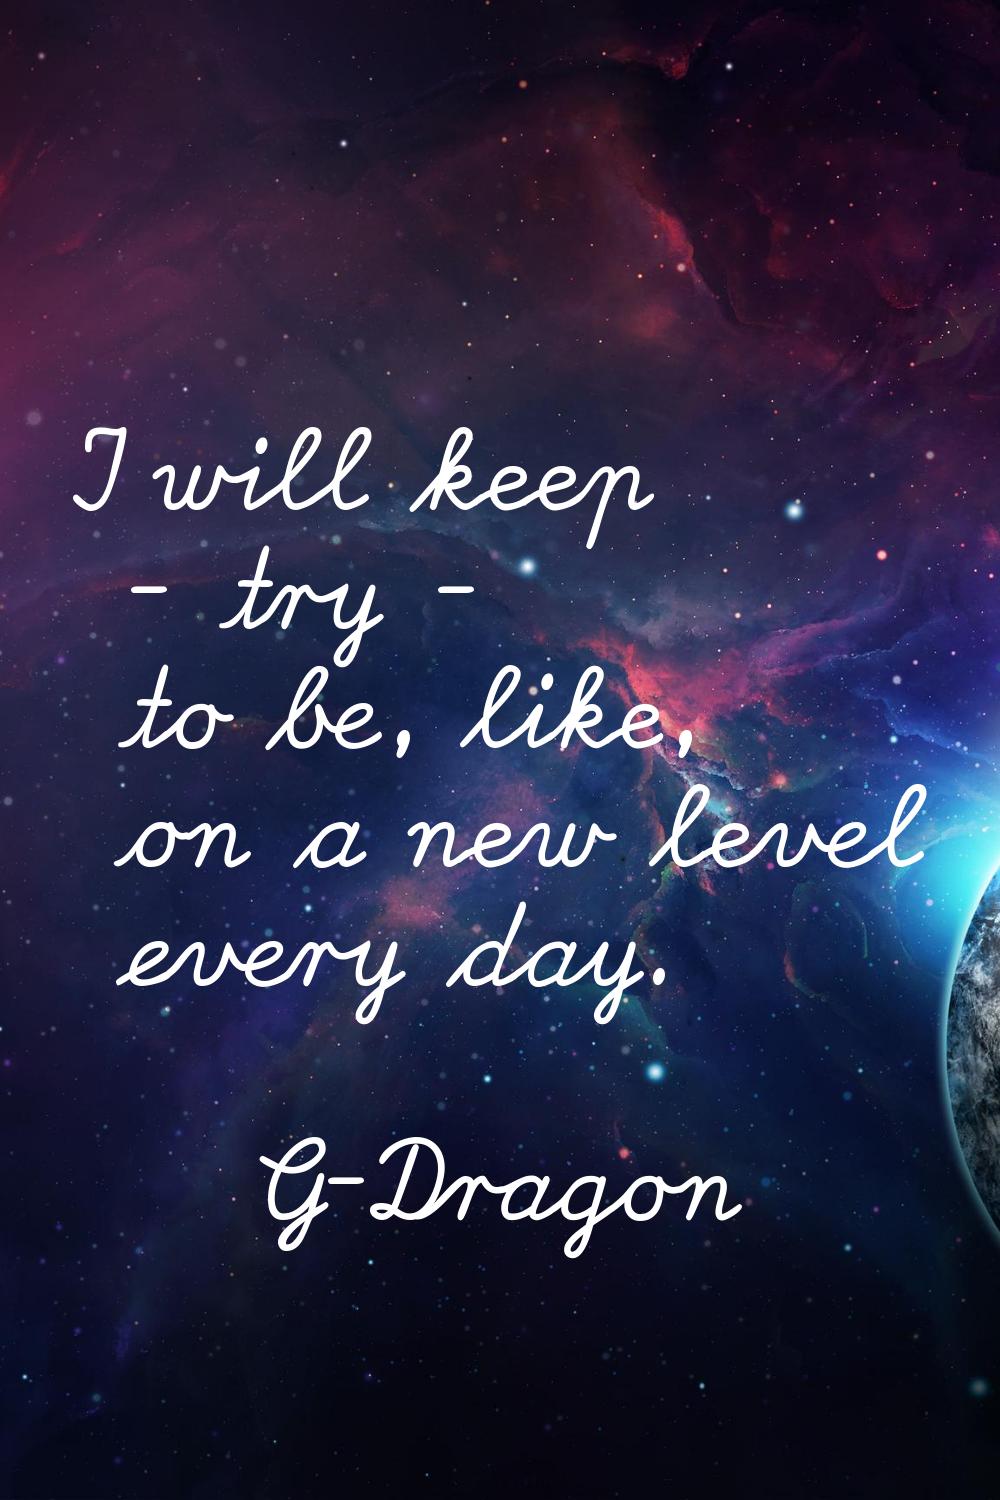 I will keep - try - to be, like, on a new level every day.